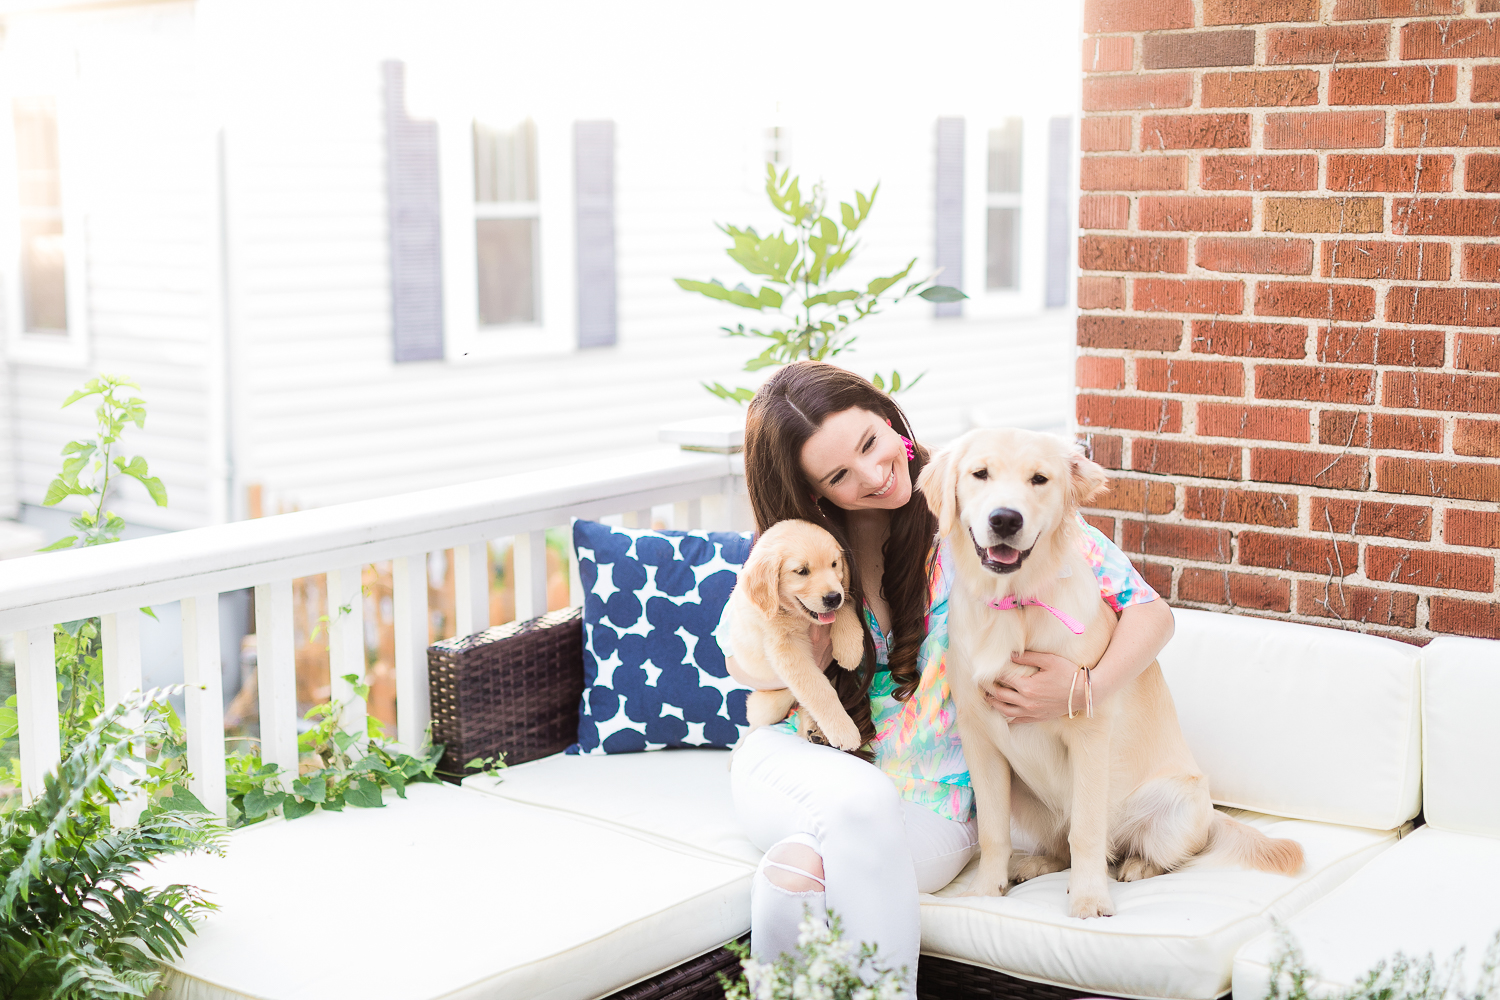 Bringing a Puppy Home Checklist, Puppy Proofing Your Home Checklist, Clear the Shelters Day information, Clear the Shelters: How to Prepare for a New Puppy by southern blogger and dog mom Stephanie Ziajka from Diary of a Debutante, Golden retriever puppies